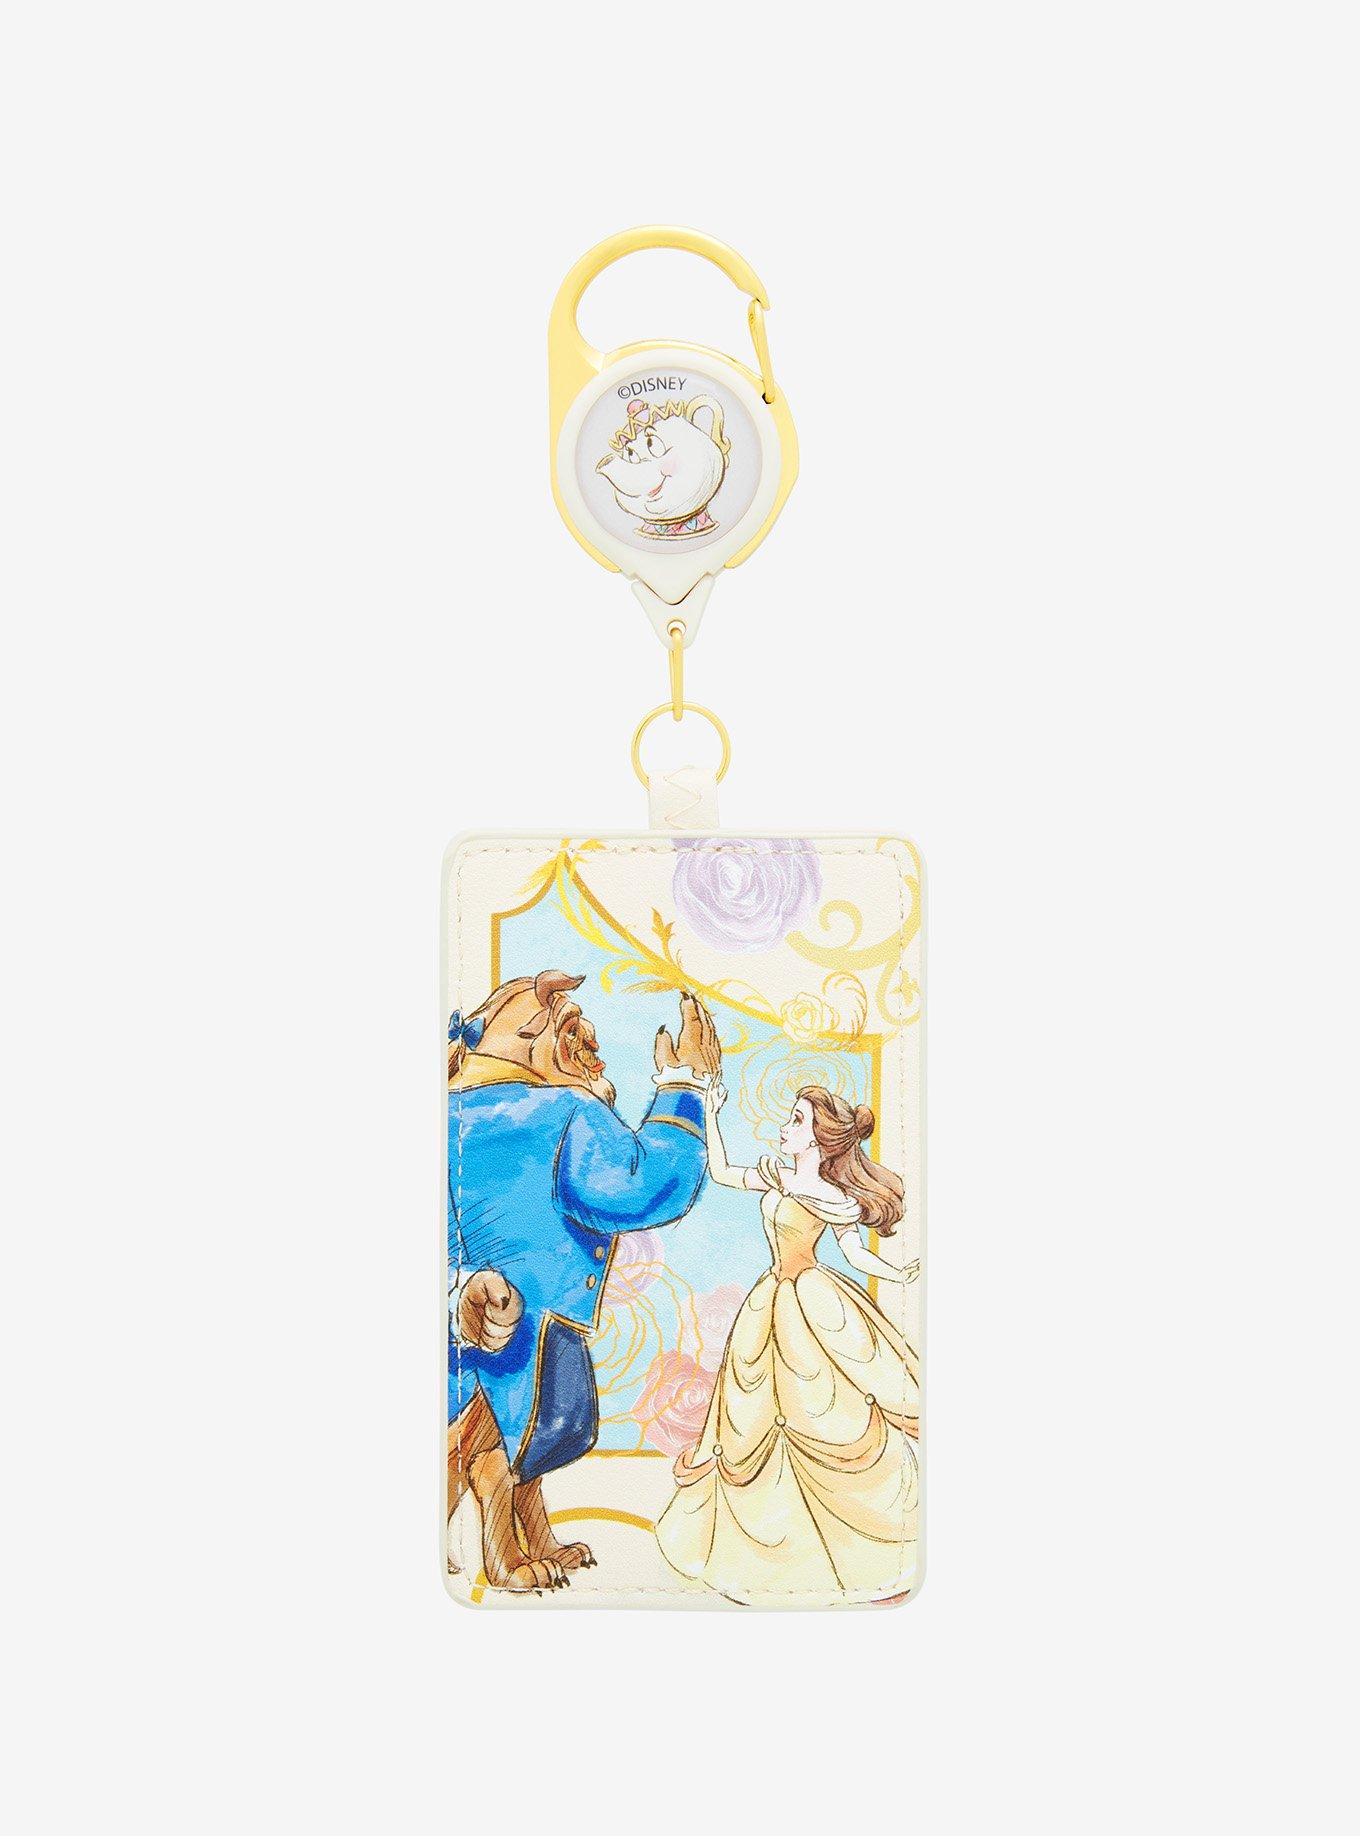 I Am Belle Princess Disney Graphic Cartoon Water Tracker Bottle - Jolly  Family Gifts